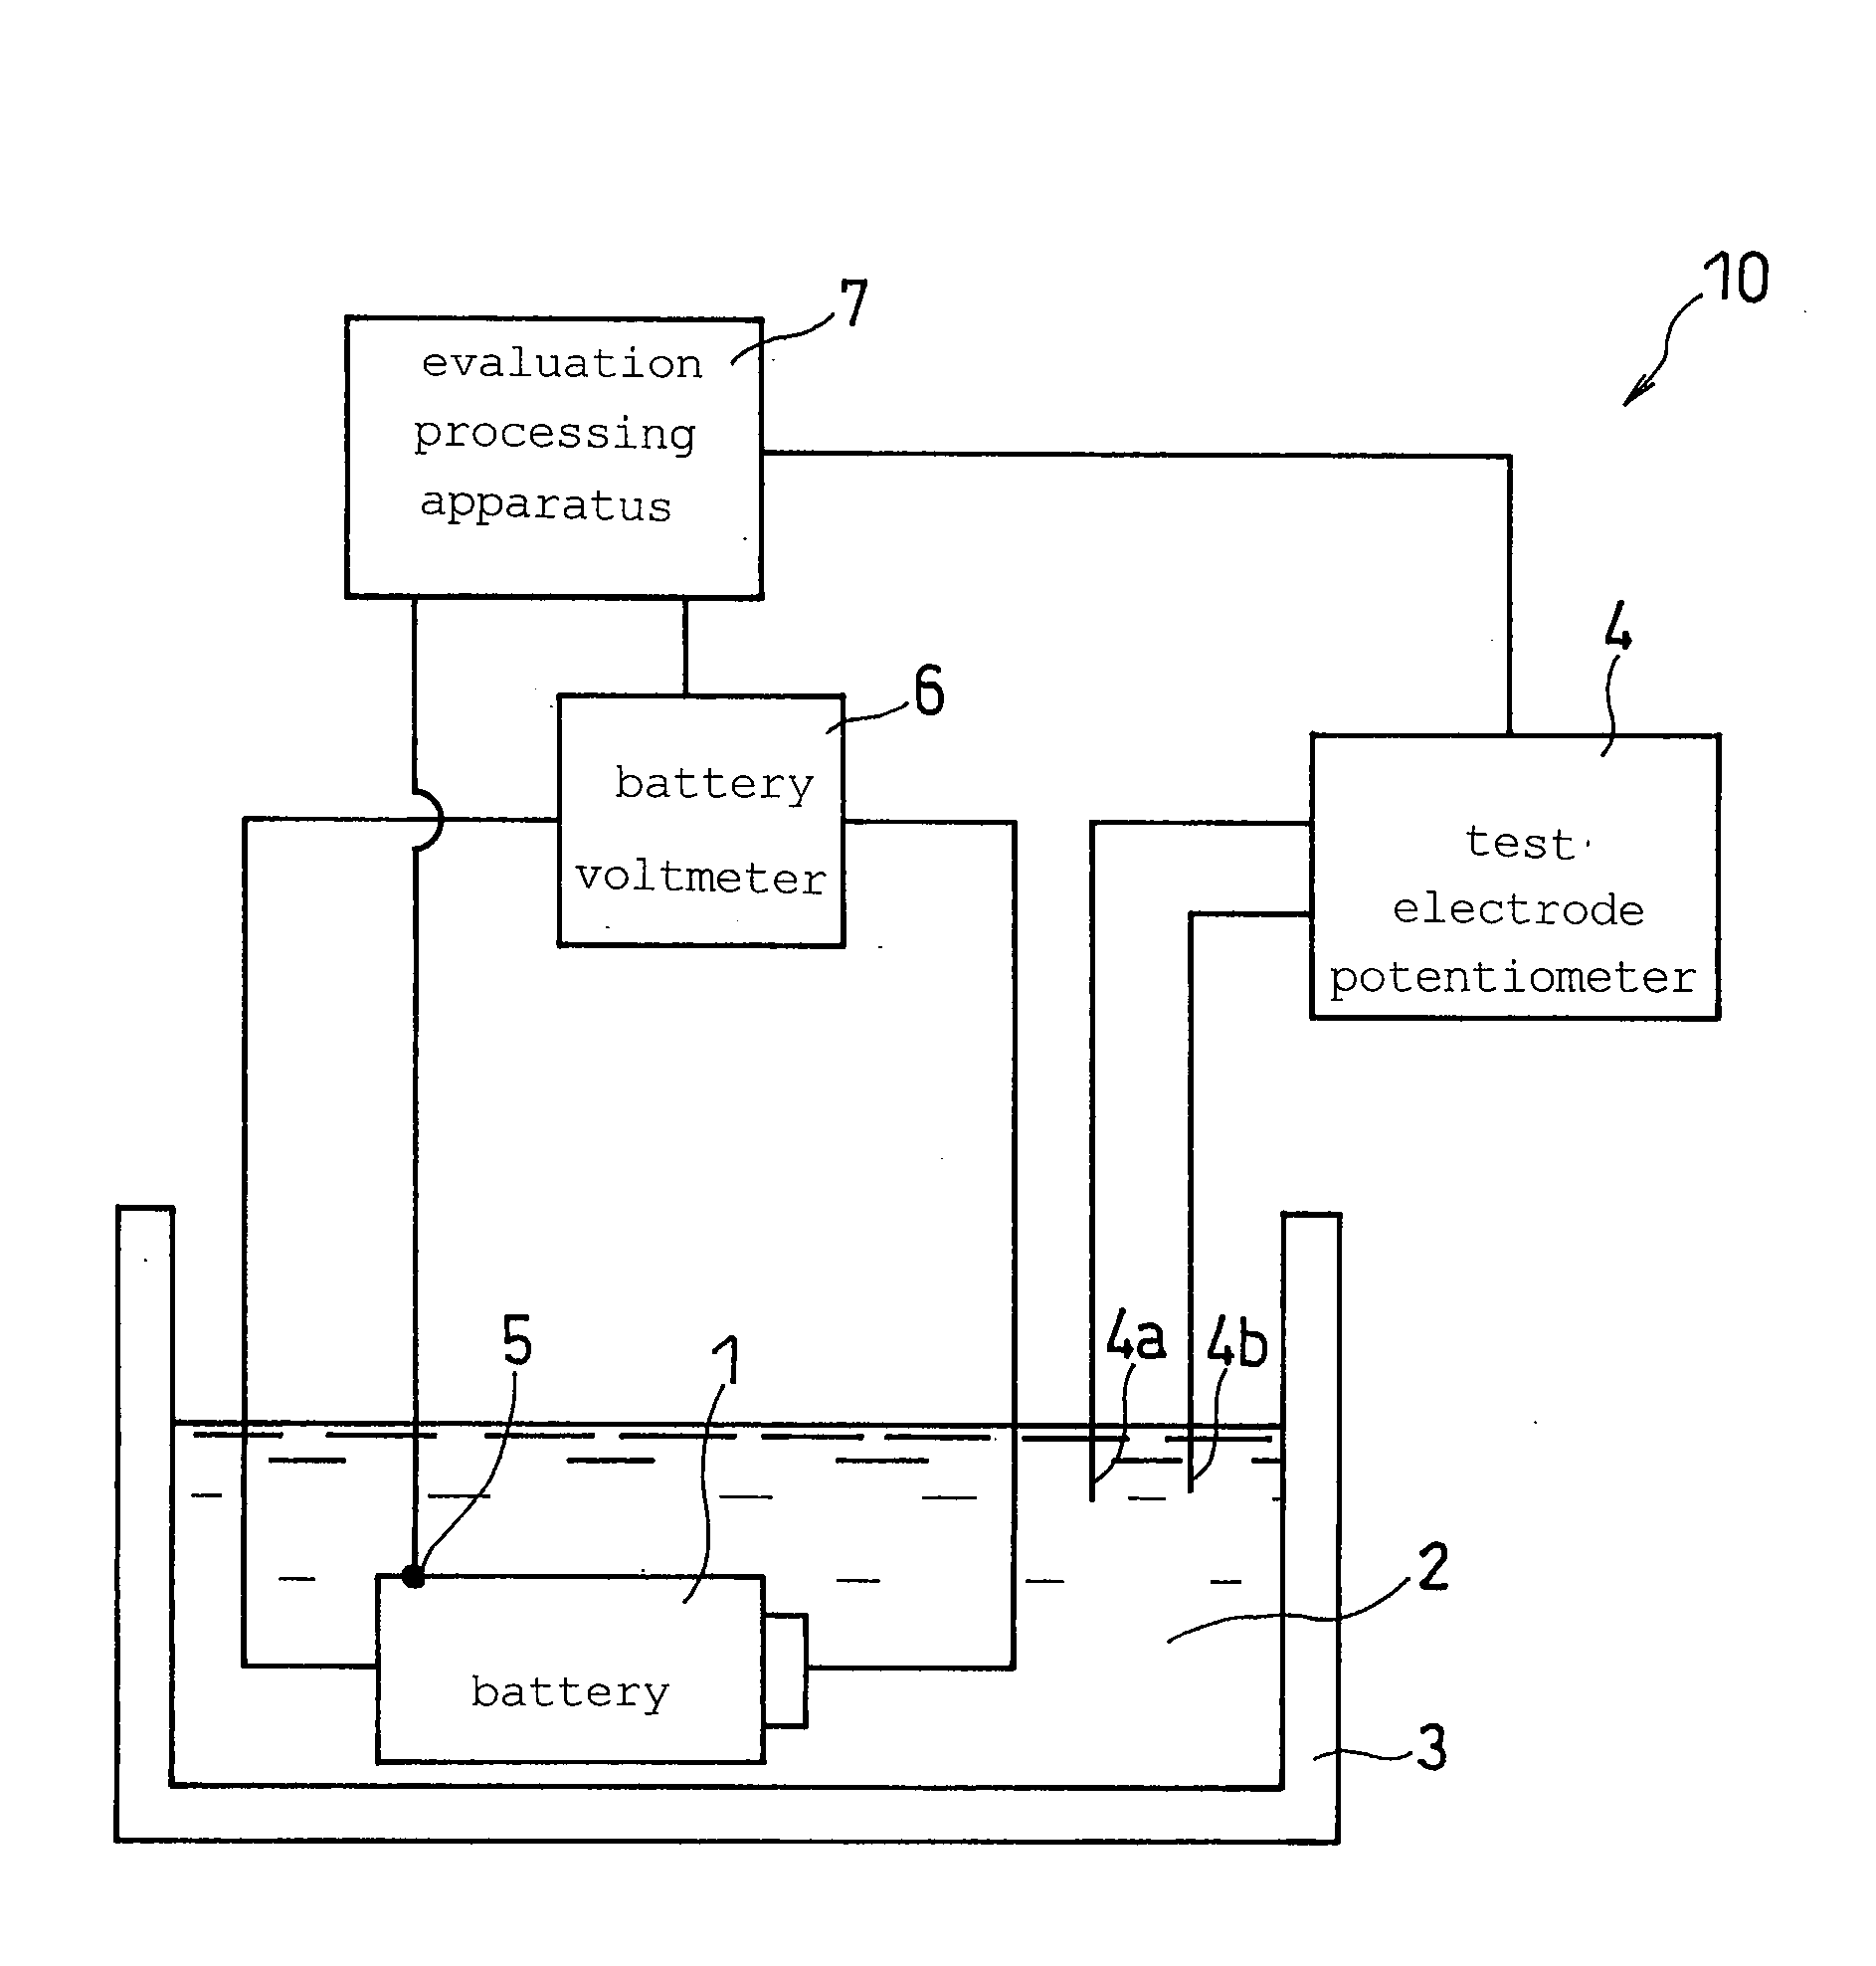 Evaluation method and evaluation apparatus for evaluating battery safety, and battery whose safety indices have been determined with the same